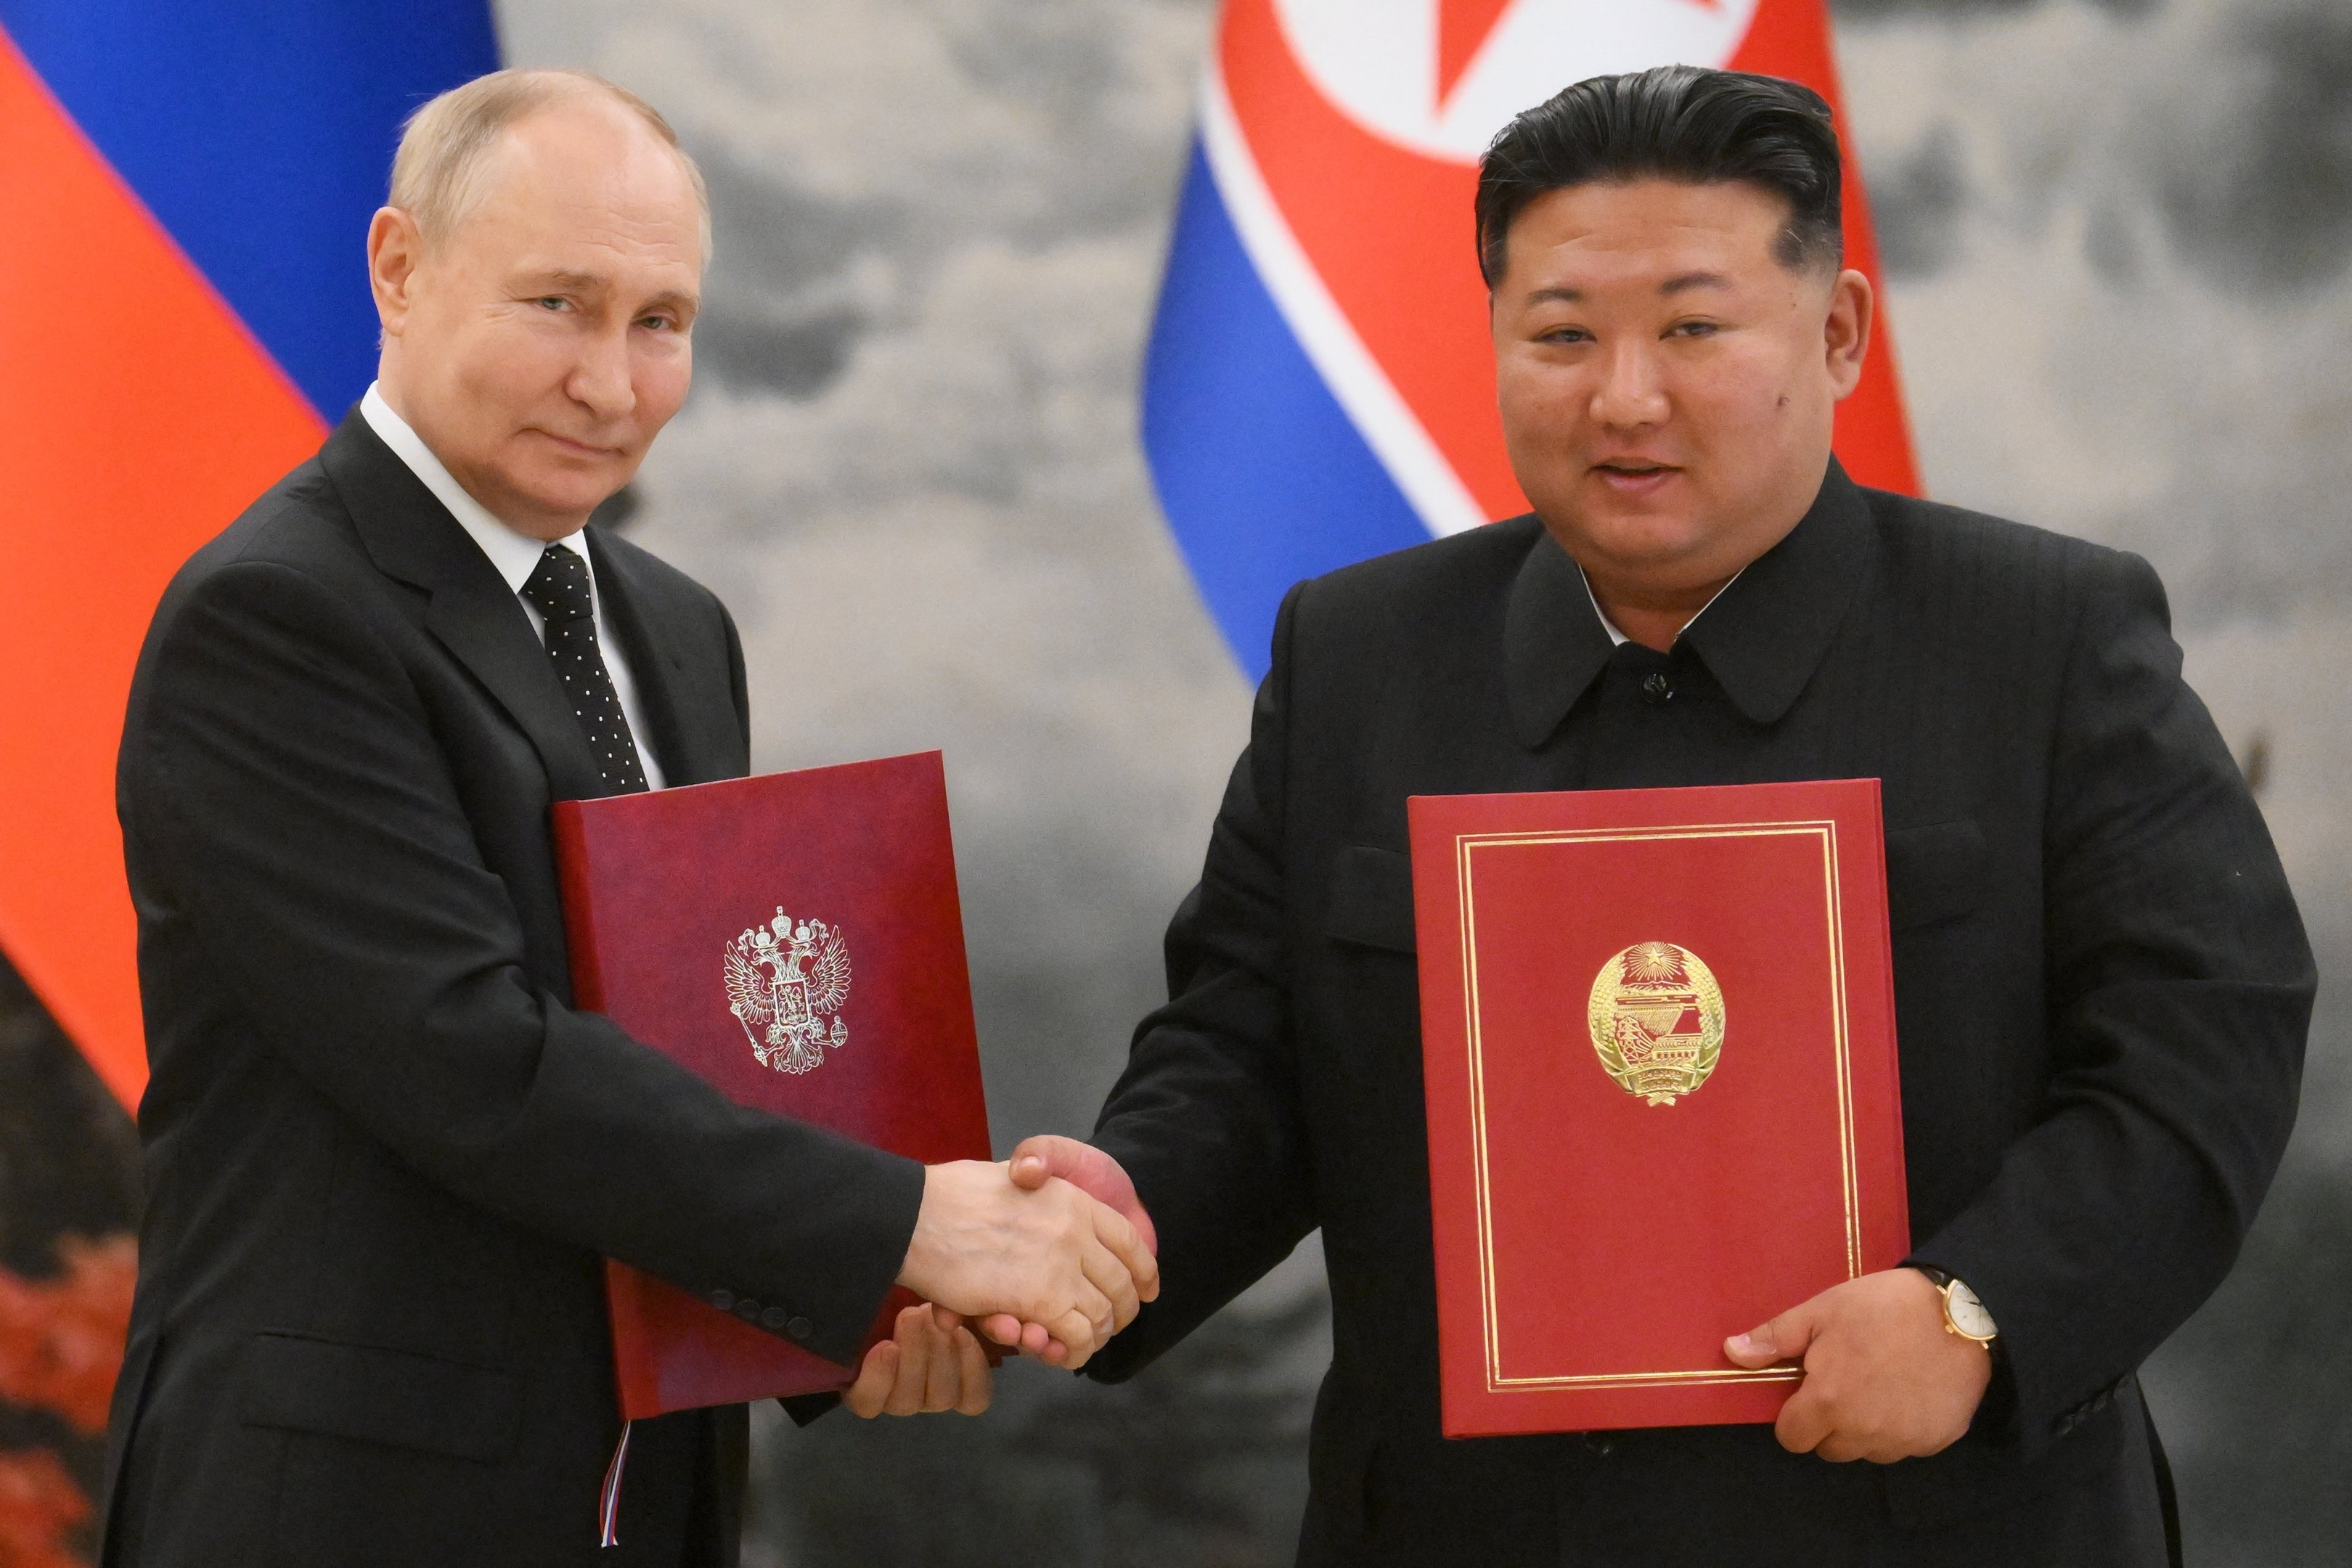 In this pool photograph distributed by the Russian state agency Sputnik, Russian President Vladimir Putin (L) shakes hands with North Korea's leader Kim Jong Un (R) after a signing ceremony following their bilateral talks at Kumsusan state residence in Pyongyang, on June 19, 2024.  (Photo by Kristina Kormilitsyna / POOL / AFP) / -- Editor's note : this image is distributed by the Russian state owned agency Sputnik -